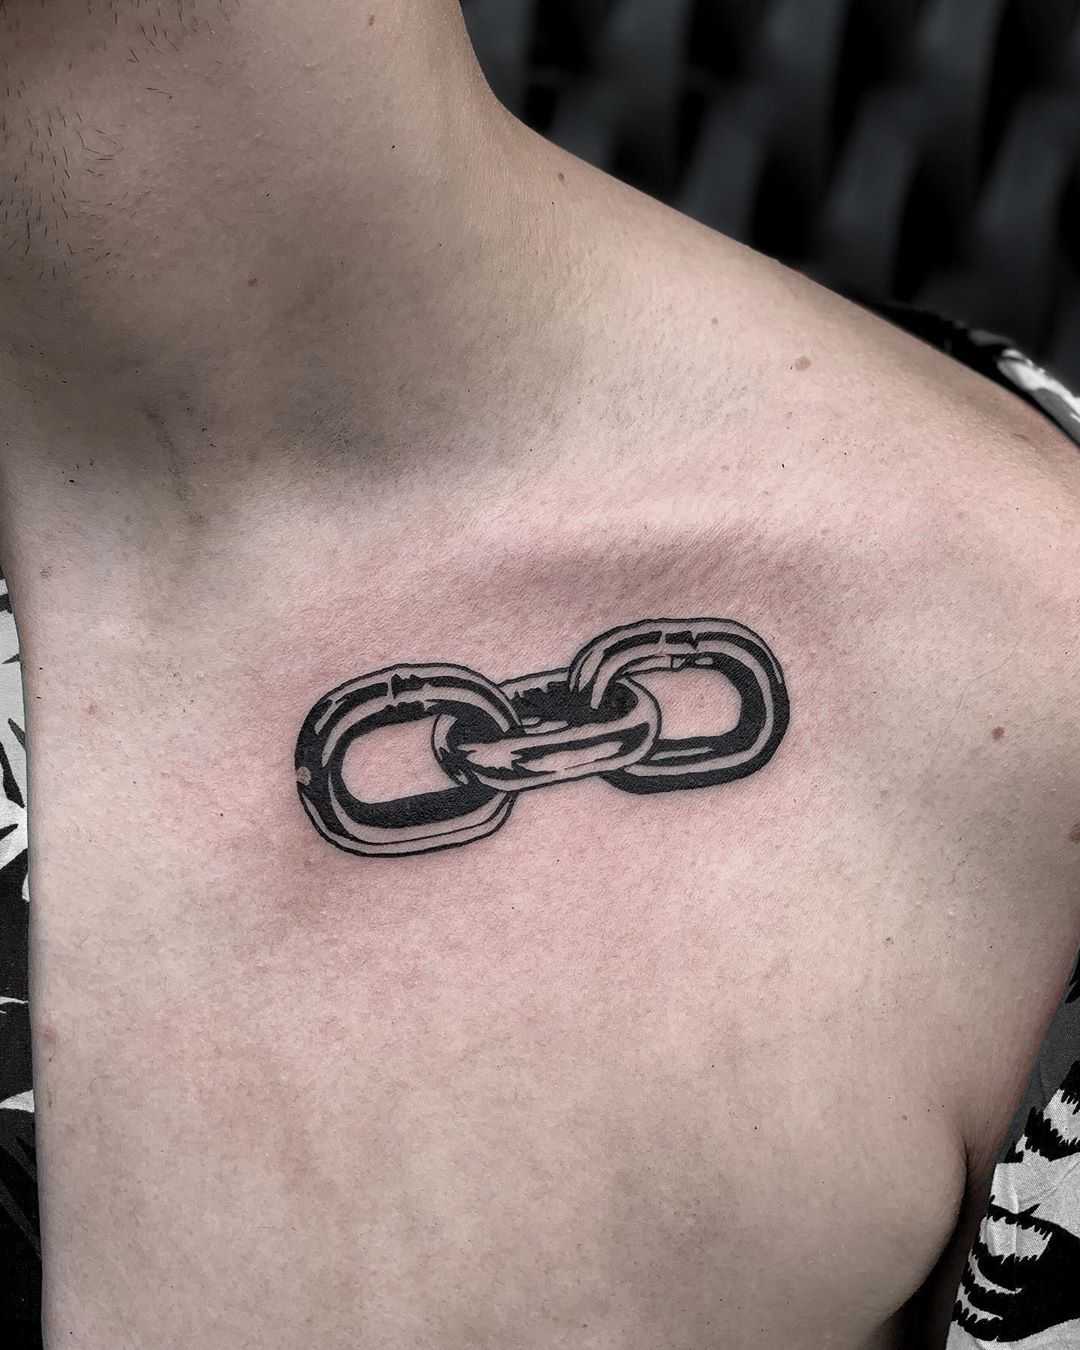 Chain link tattoo by Loz McLean